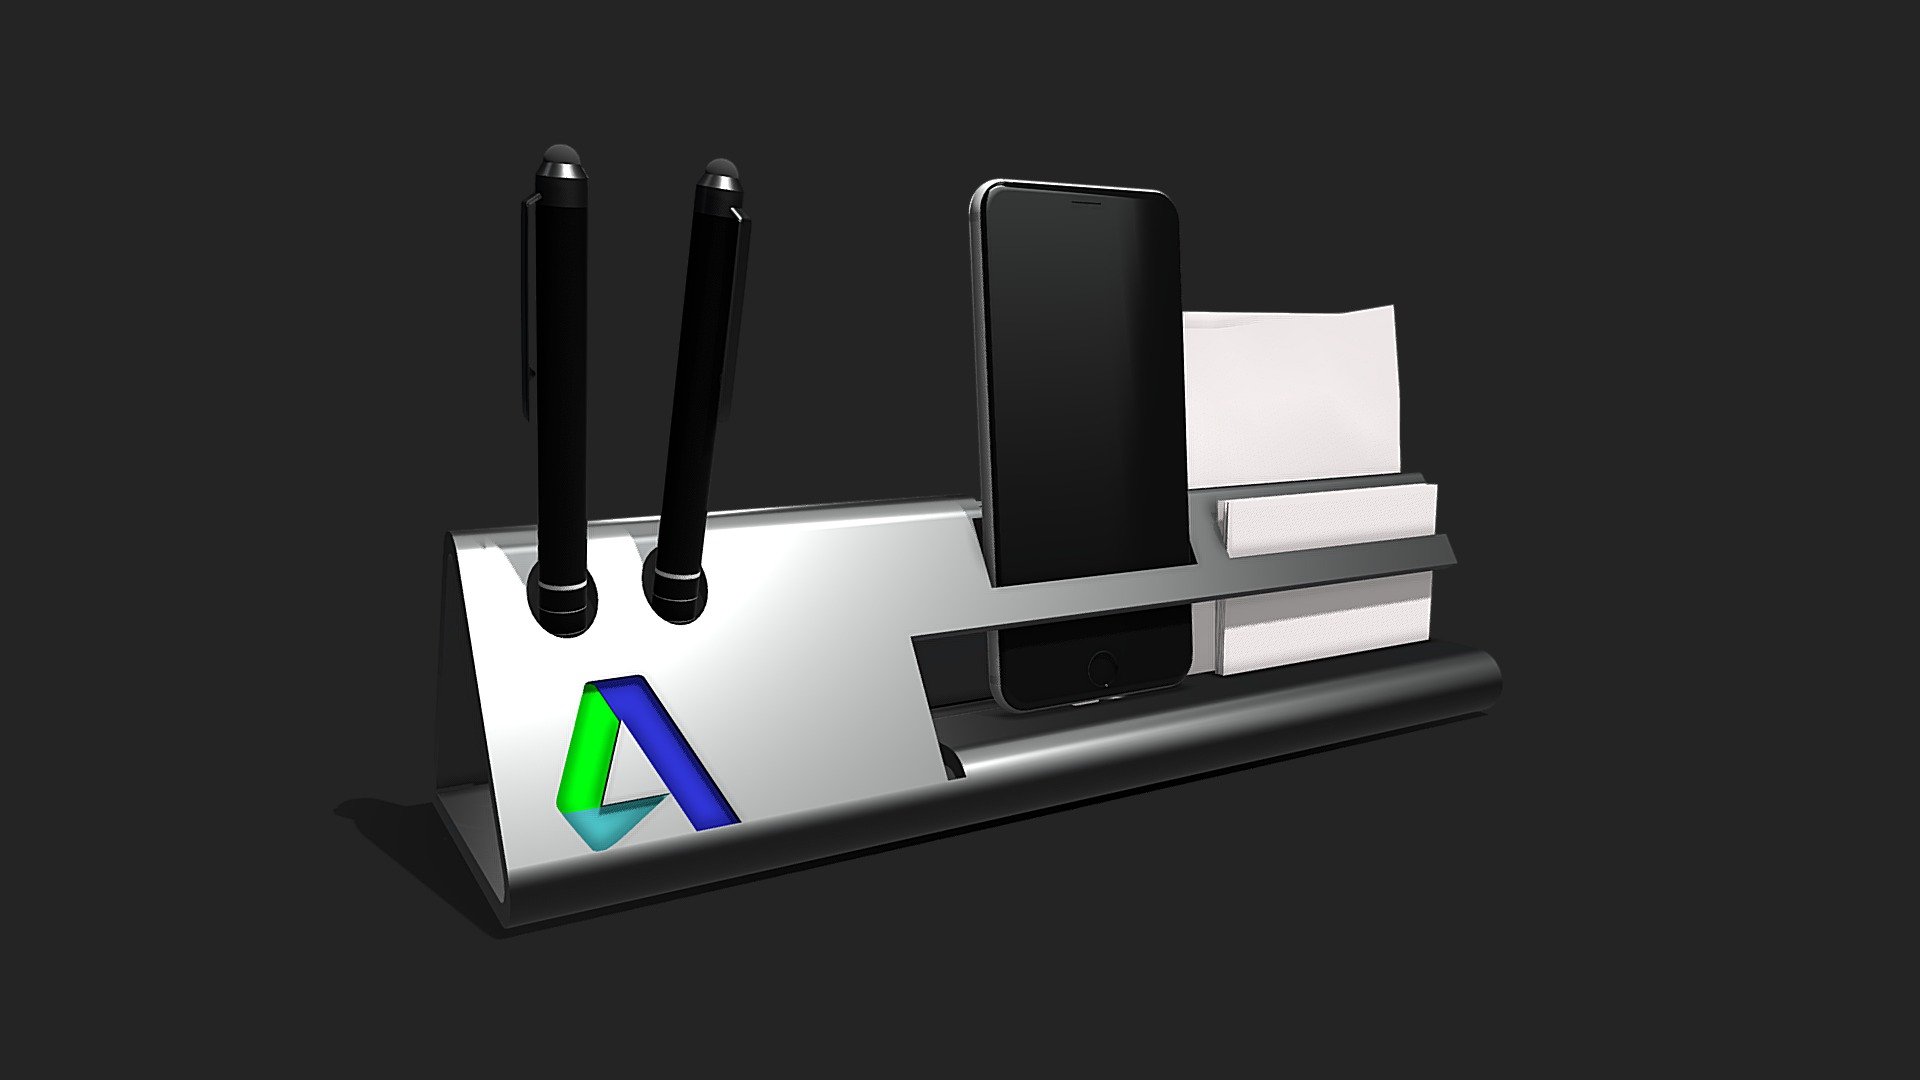 This is a model of a desk organiser I had made while interning at autodesk. It is made using the sheet metal mode in fusion 360. For full project details check&hellip;https://www.behance.net/gallery/58939299/Autodesk-Desk-Organiser-3D-Model - Desk Organiser - Download Free 3D model by INDRO DESIGNS (@indro1997) 3d model